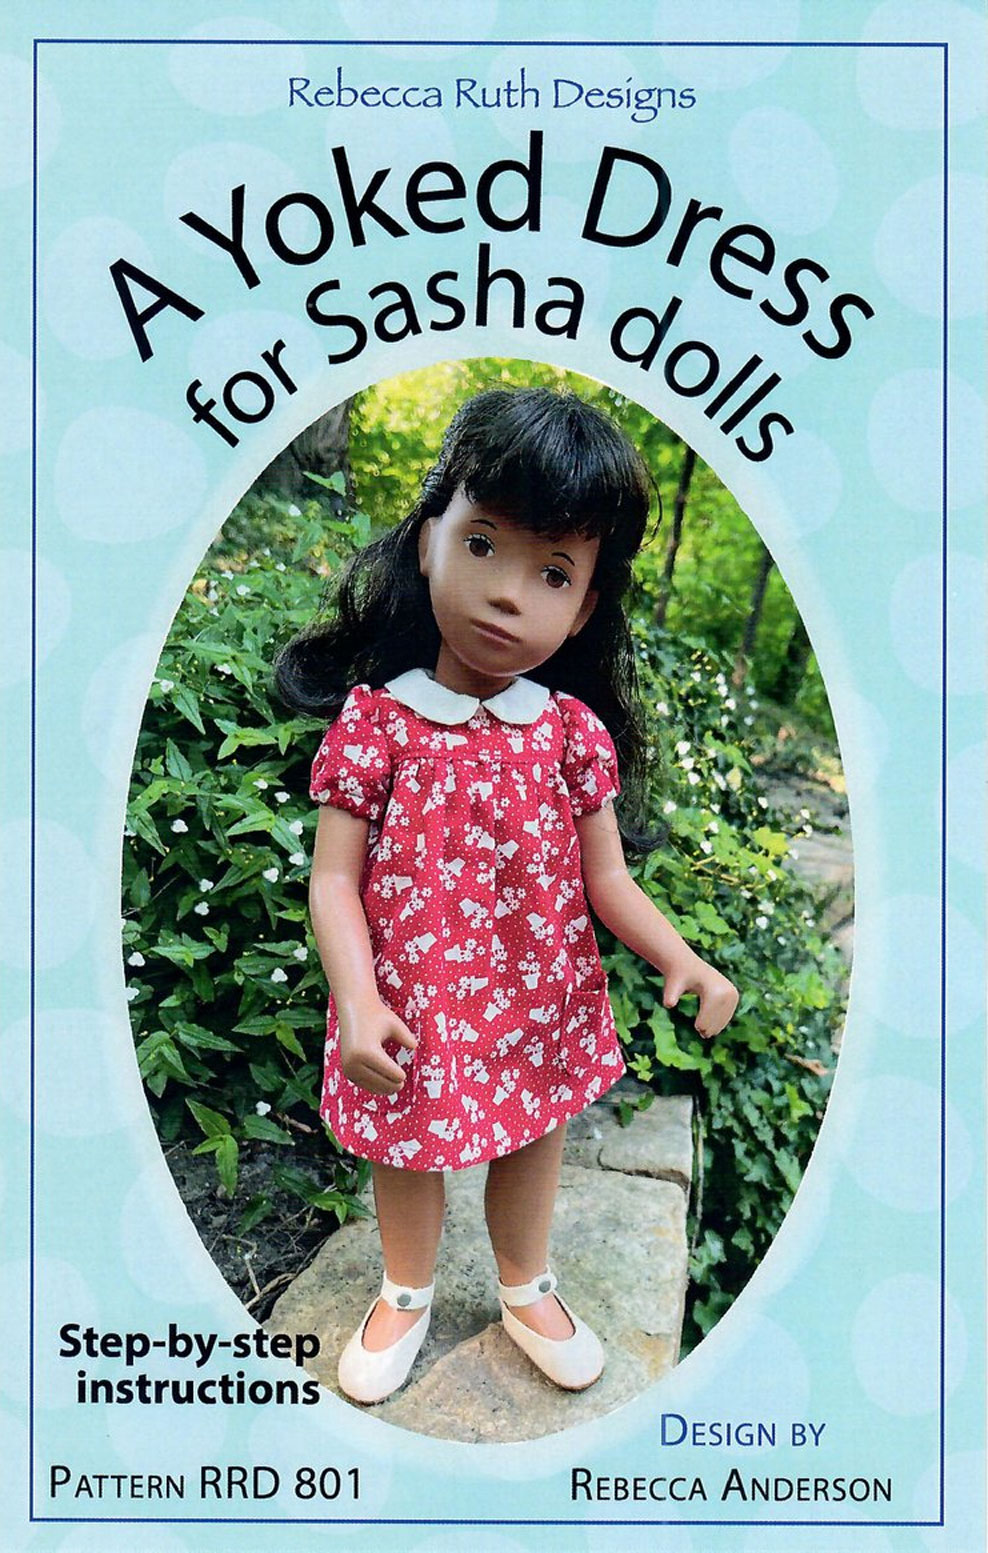 A-Yoked-Dress-for-sasha-dolls-sewing-pattern-rebecca-ruth-designs-front